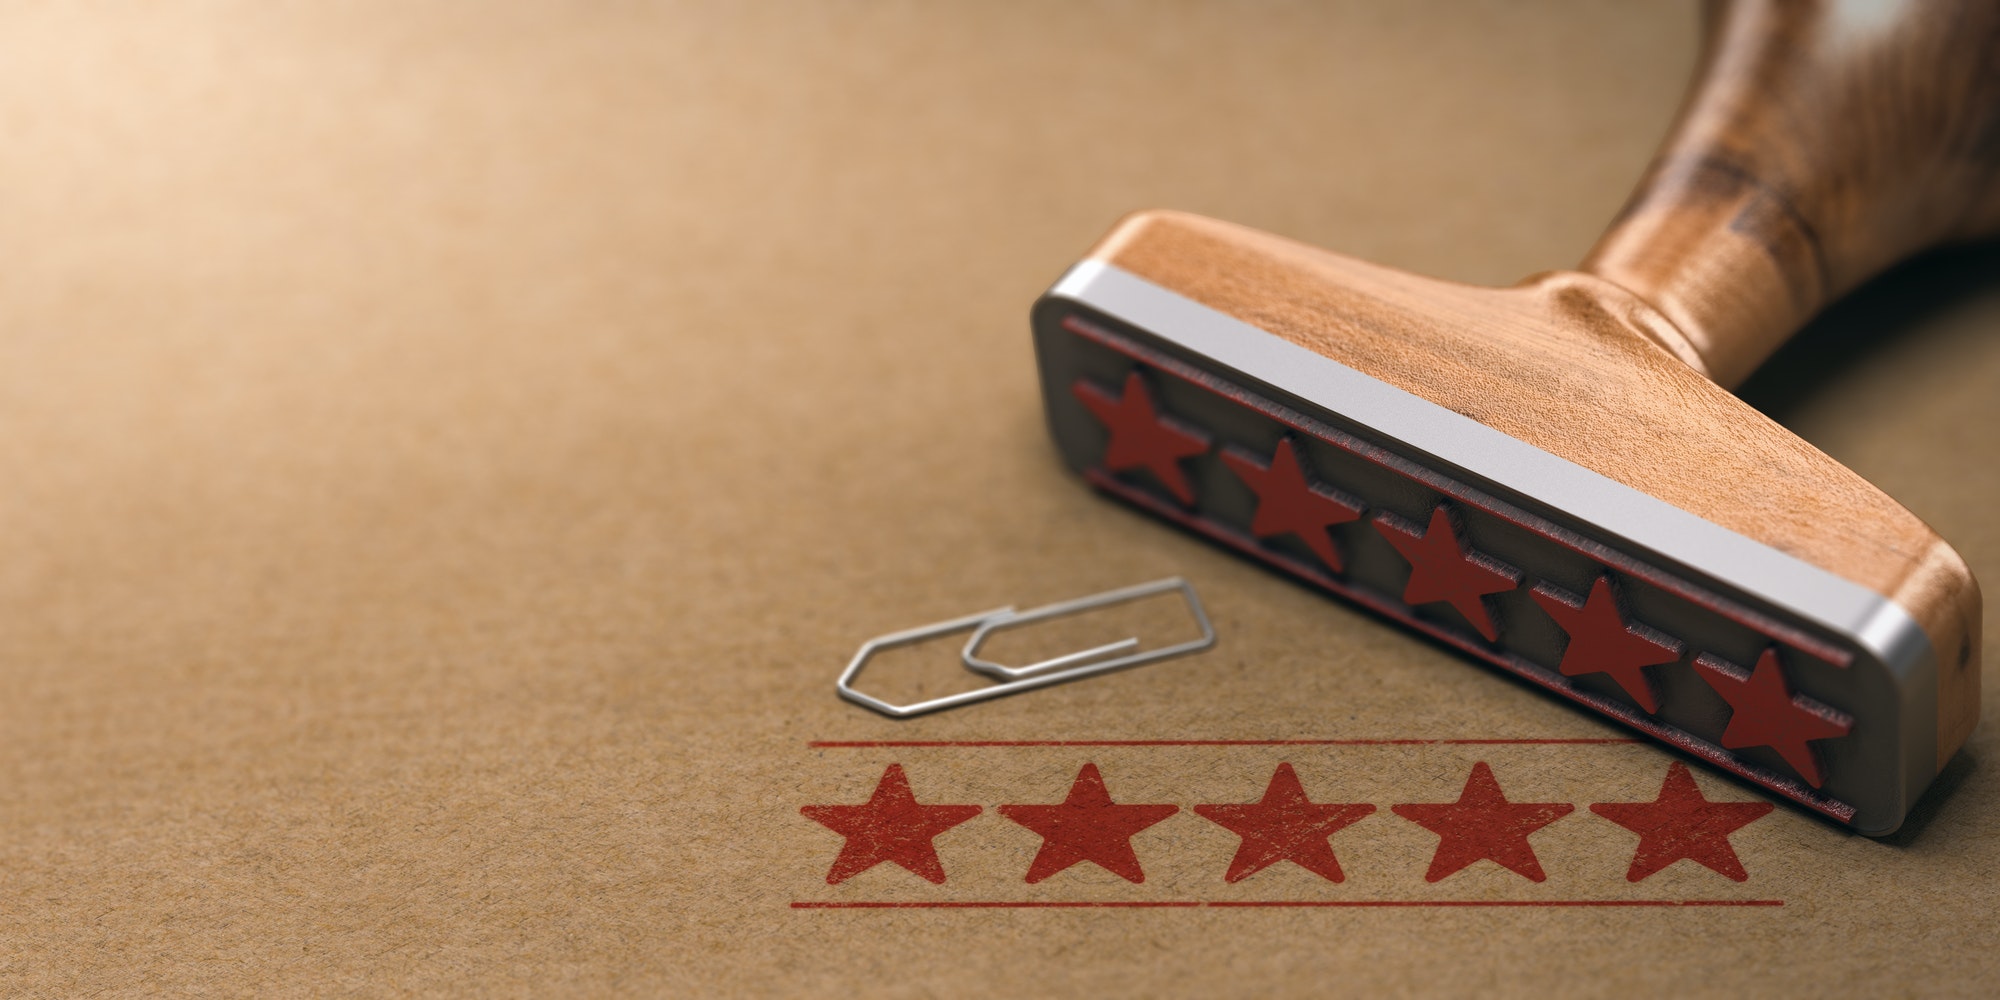 Five Stars Customer Quality Review